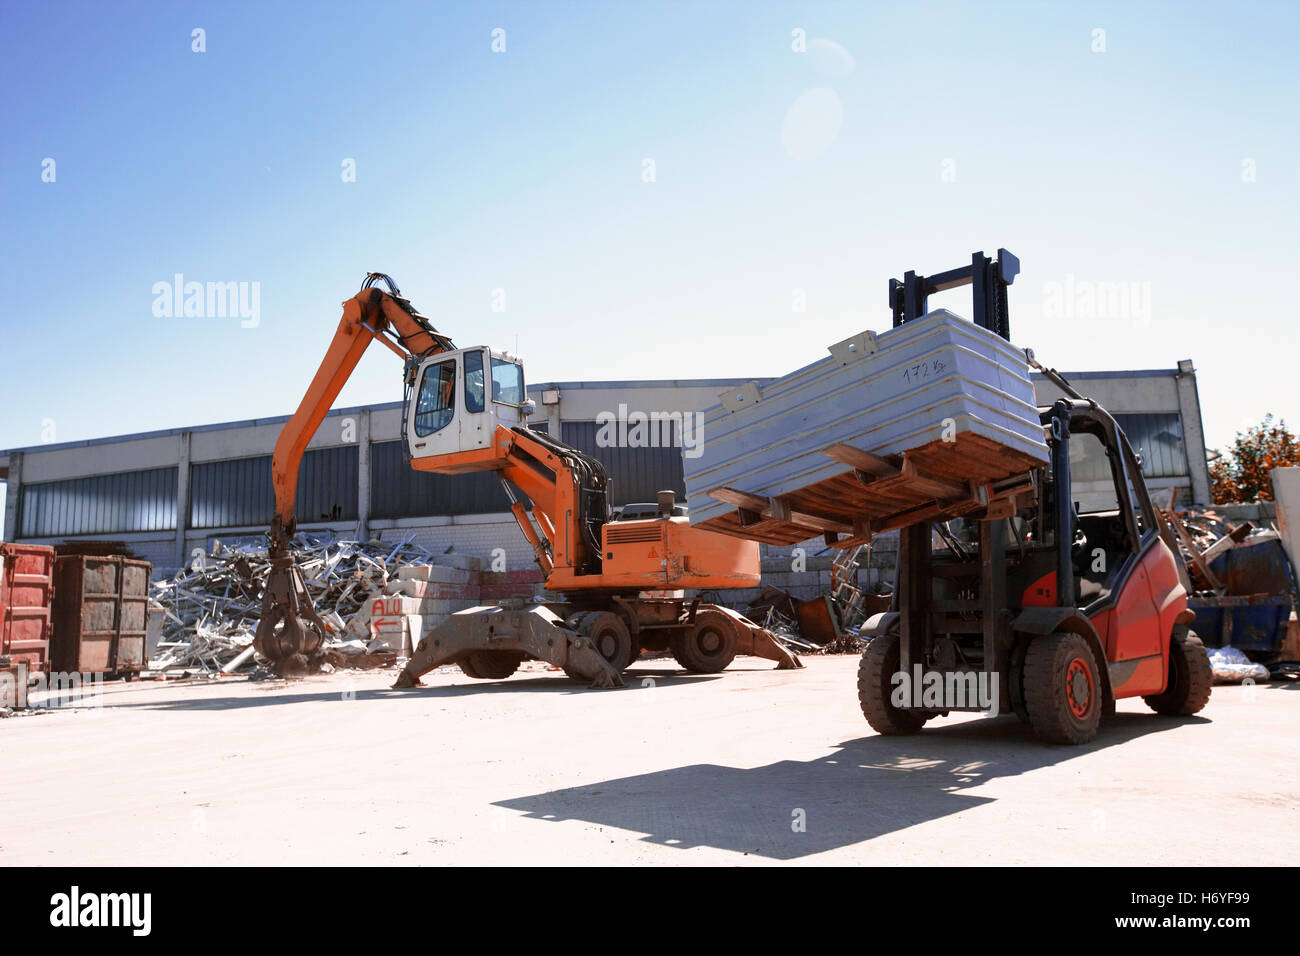 Crane grab and fork lift truck sorting and moving metals in scrap yard  Image downloaded by   at 10:17 on the 14/06/15 Stock Photo